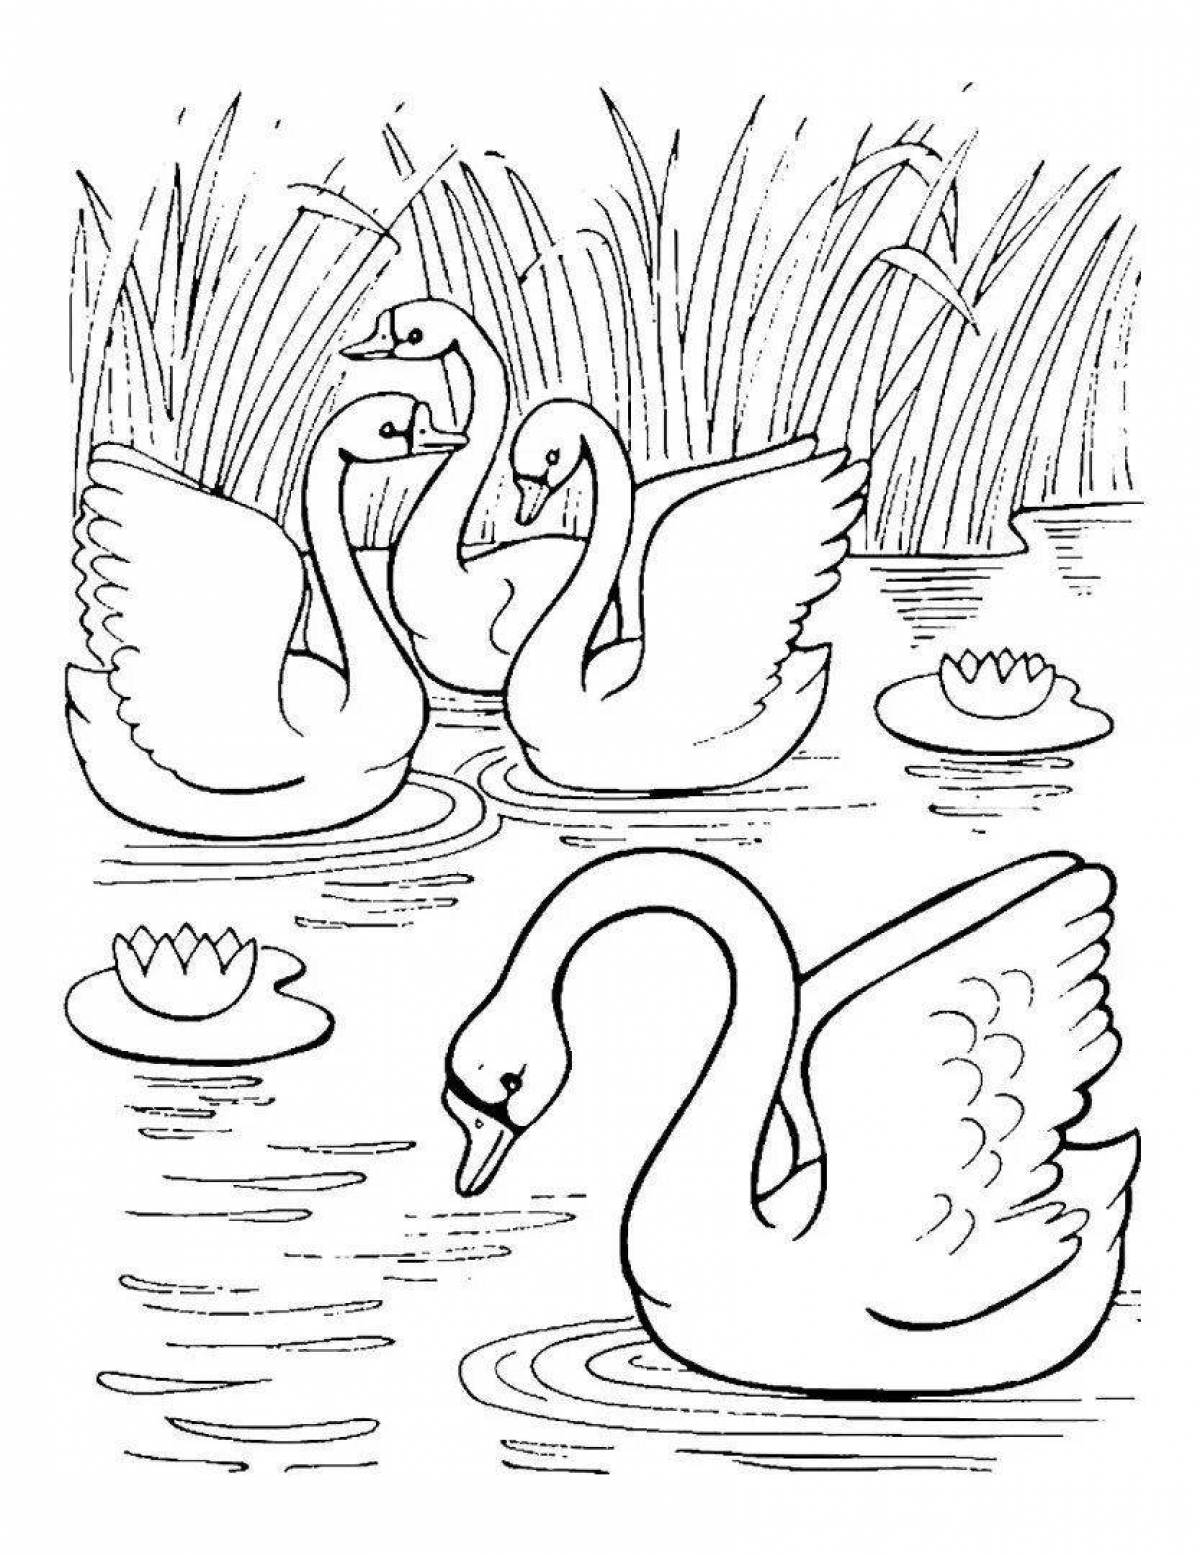 Majestic swan lake coloring pages for kids